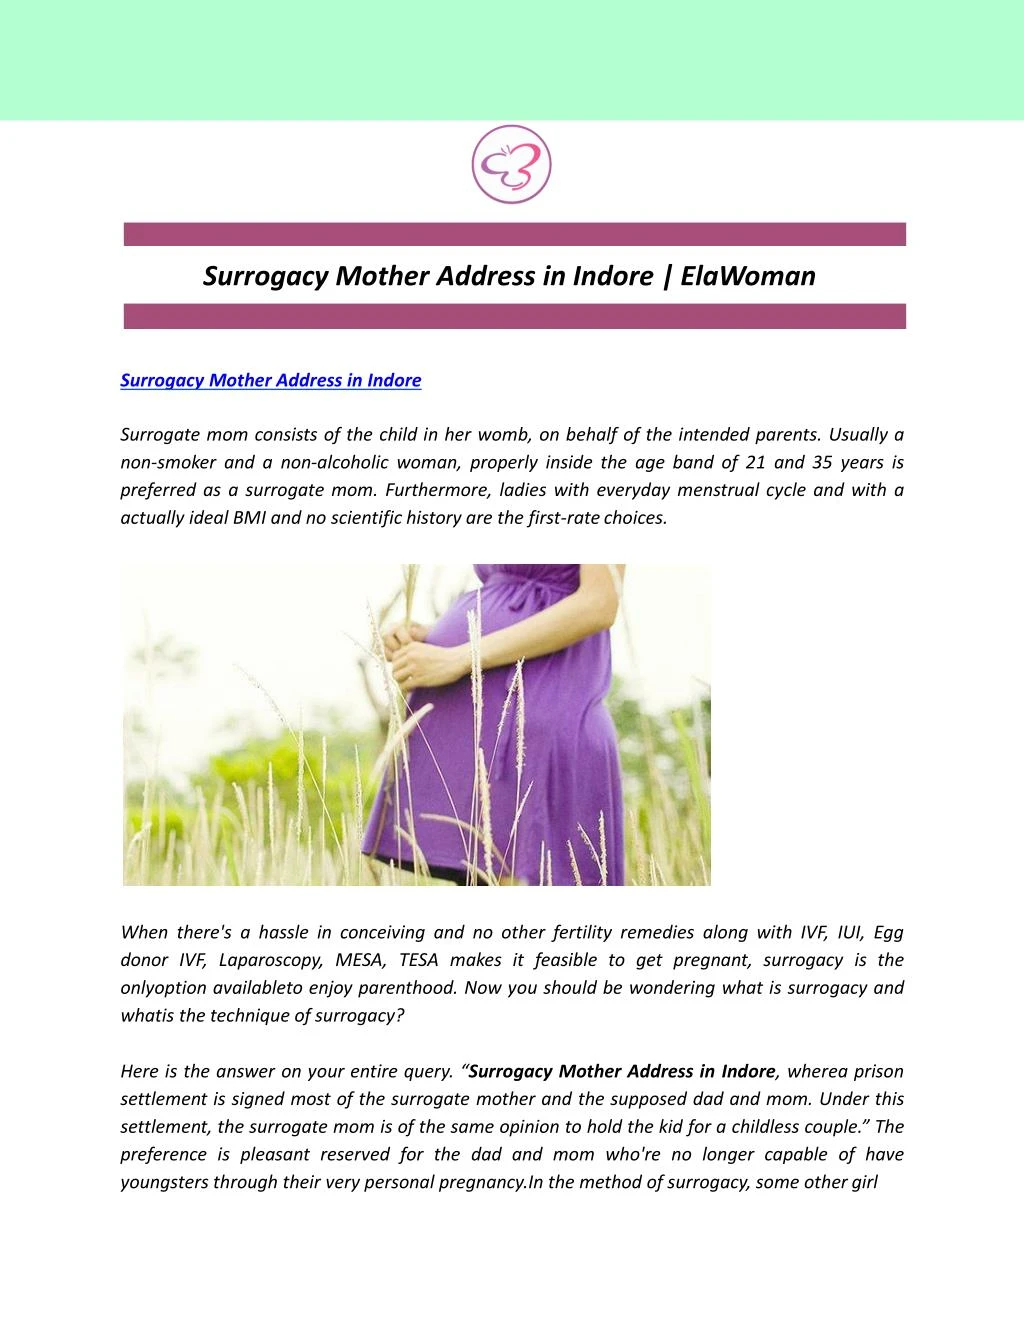 surrogacy mother address in indore elawoman